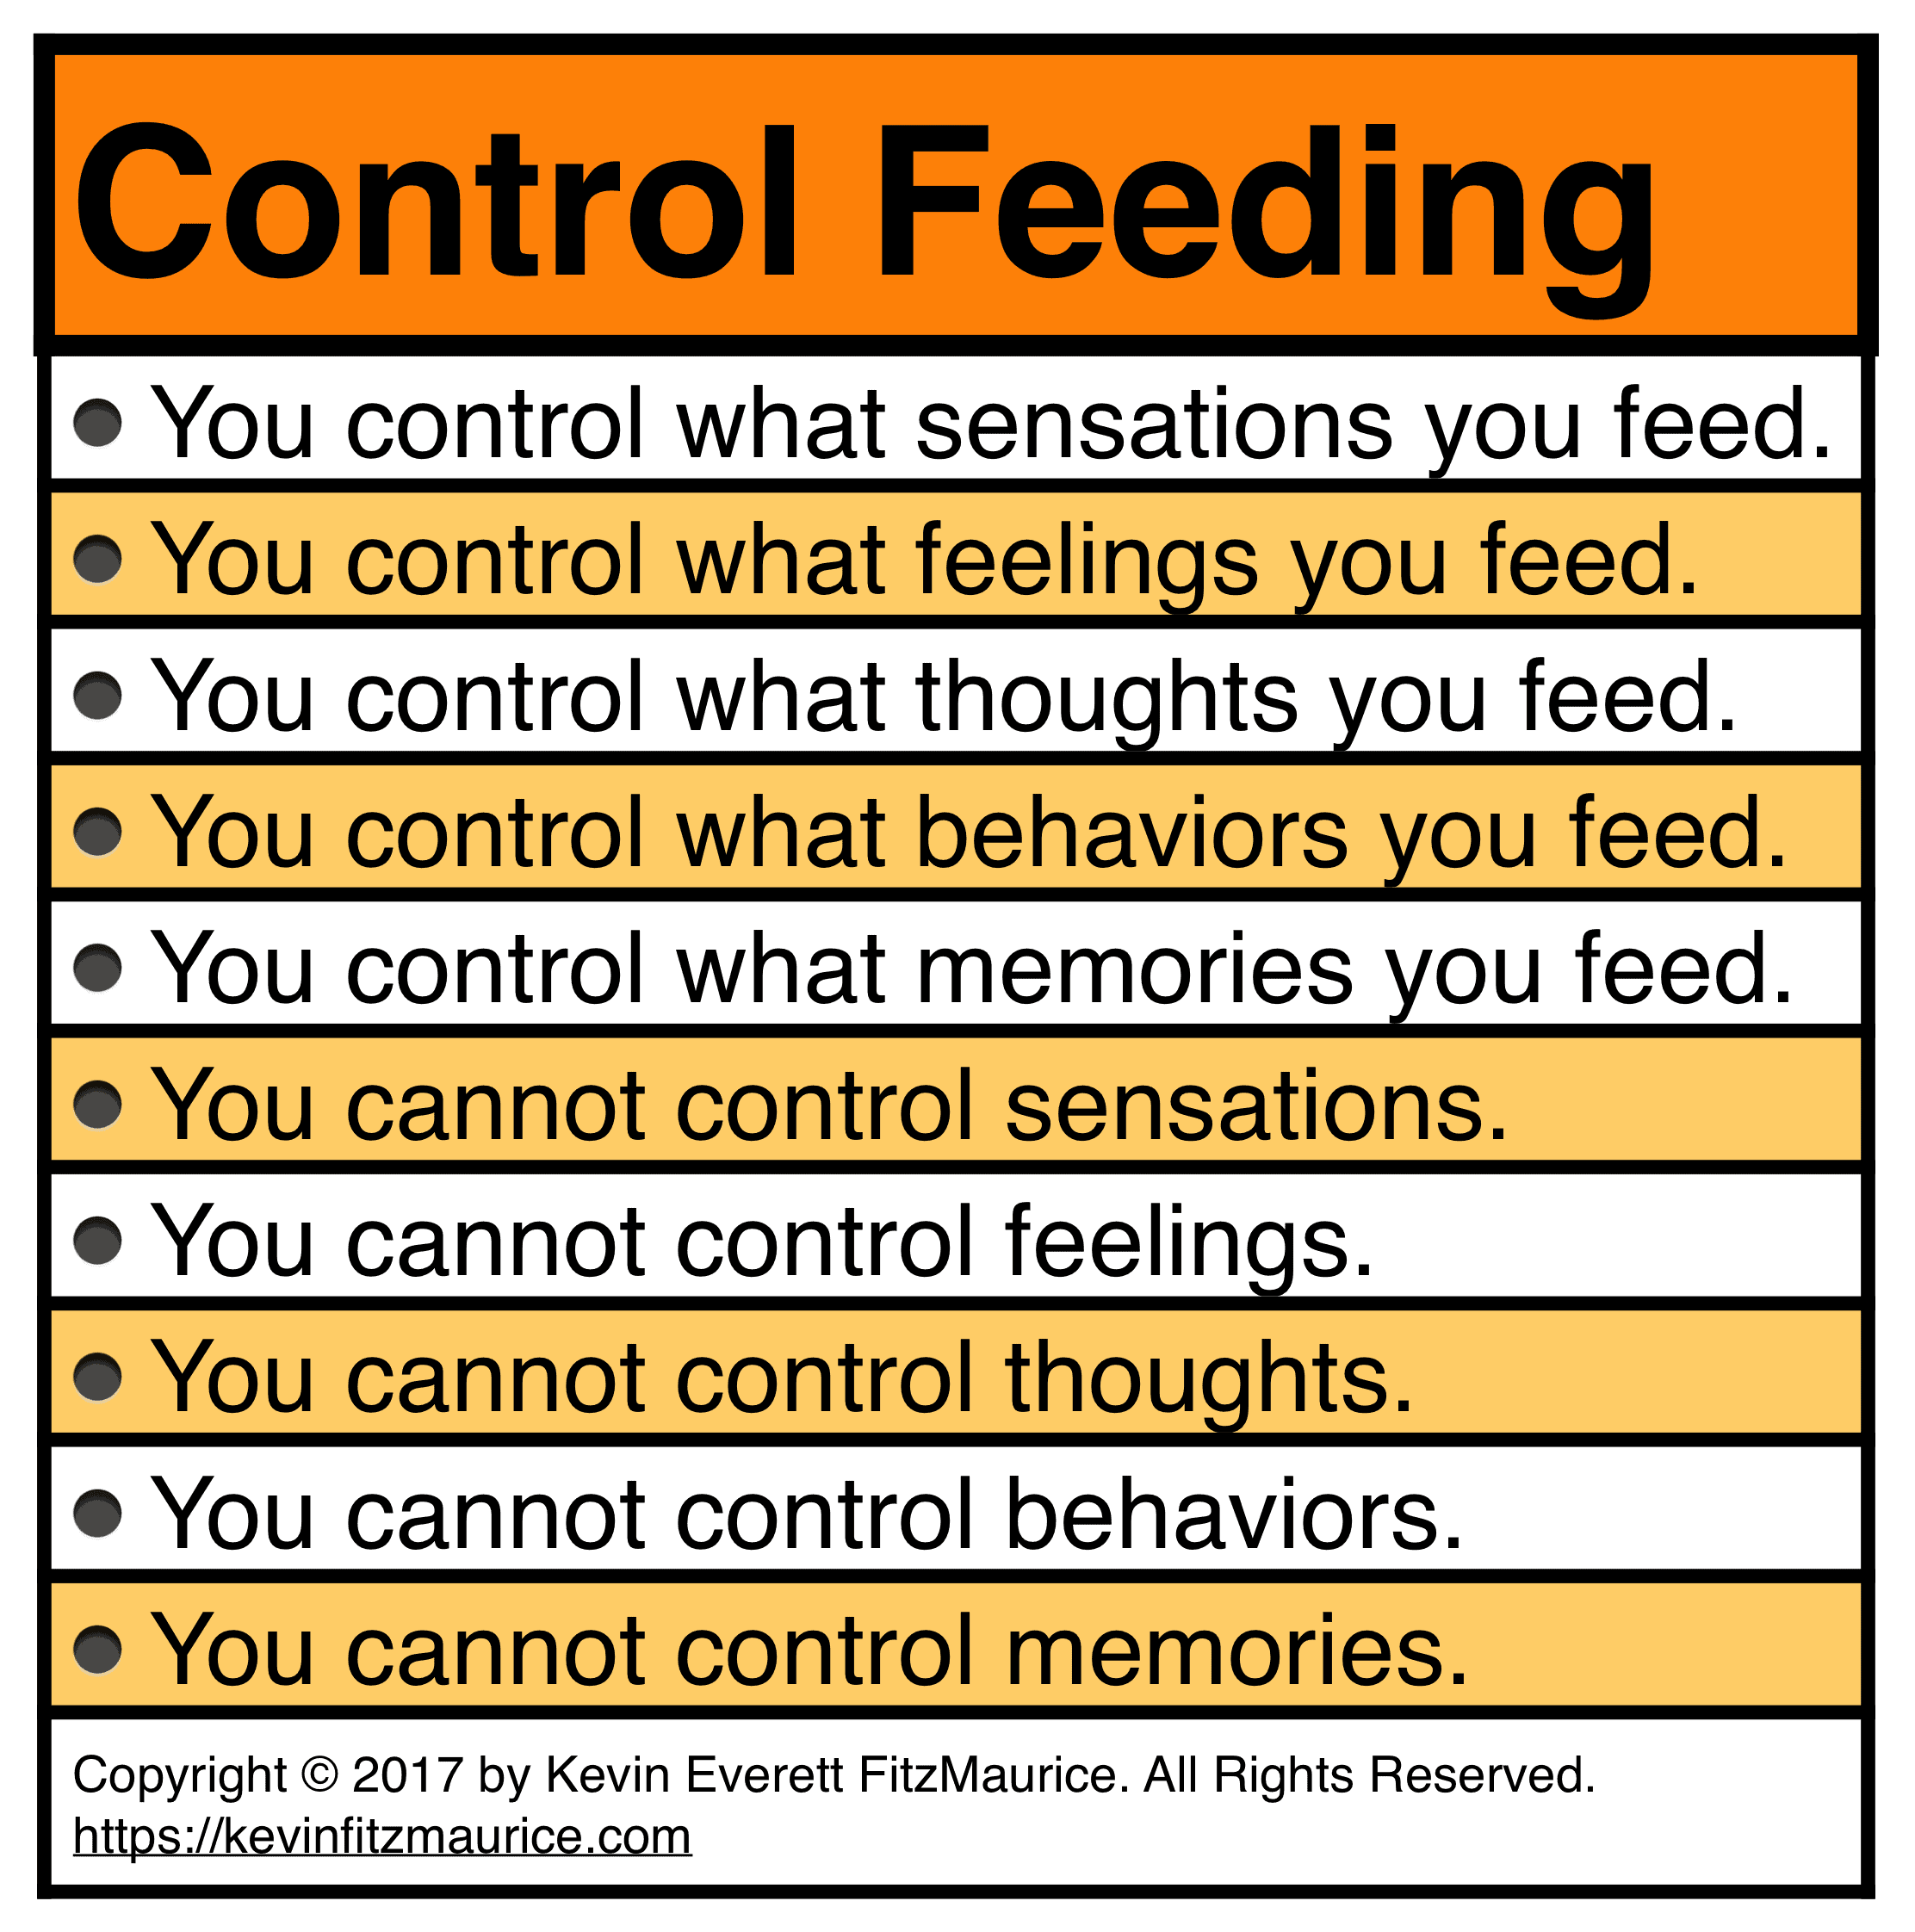 Control What You Feed to Control It